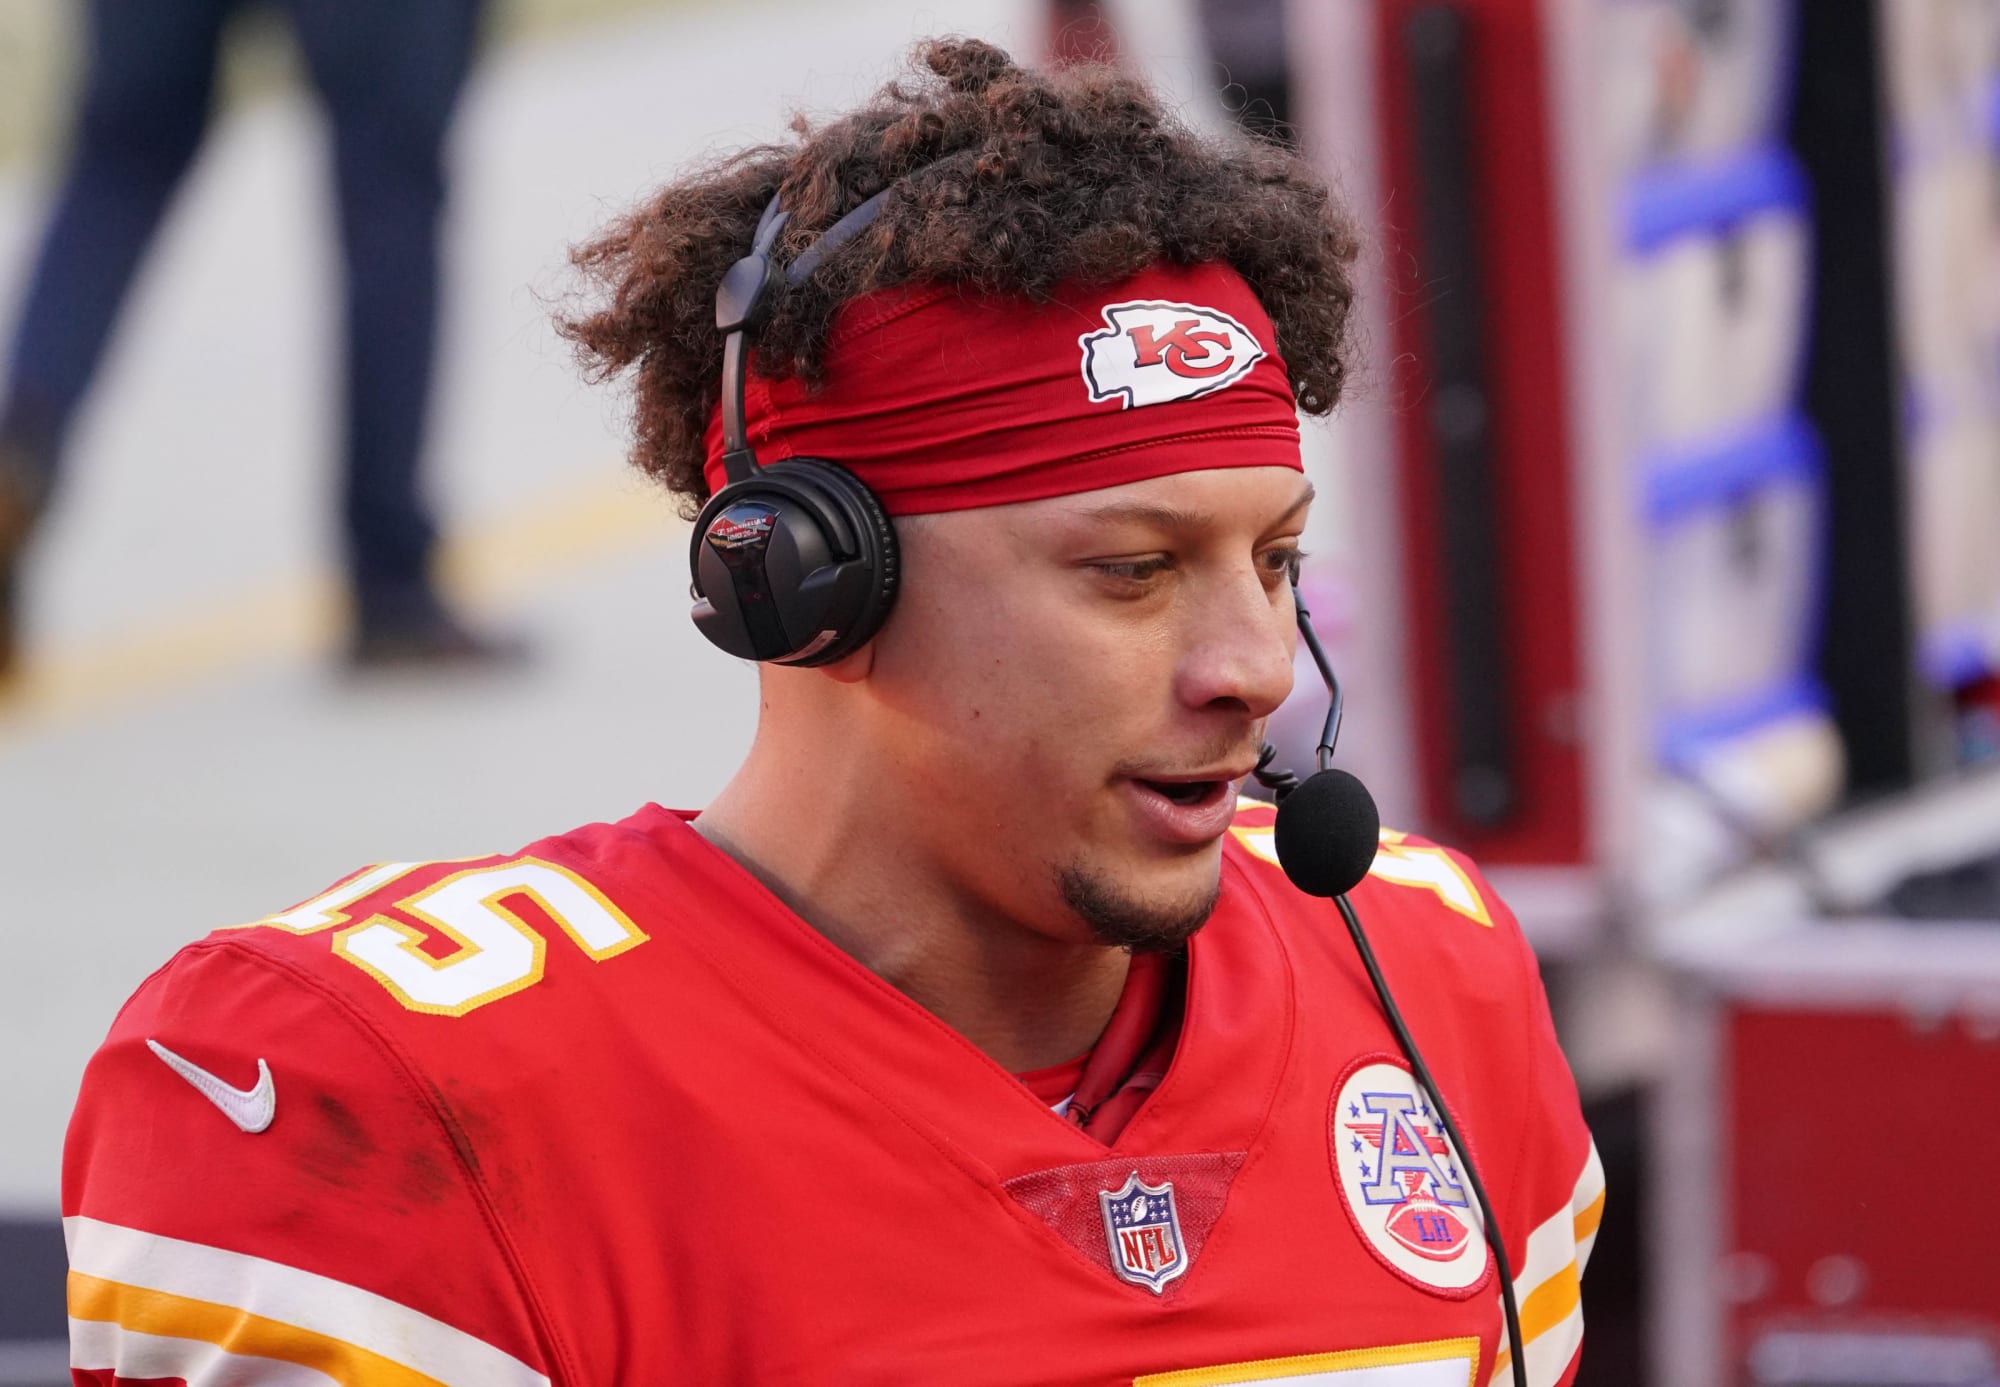 Patrick Mahomes will have 'very light practice' for Chiefs on Wednesday